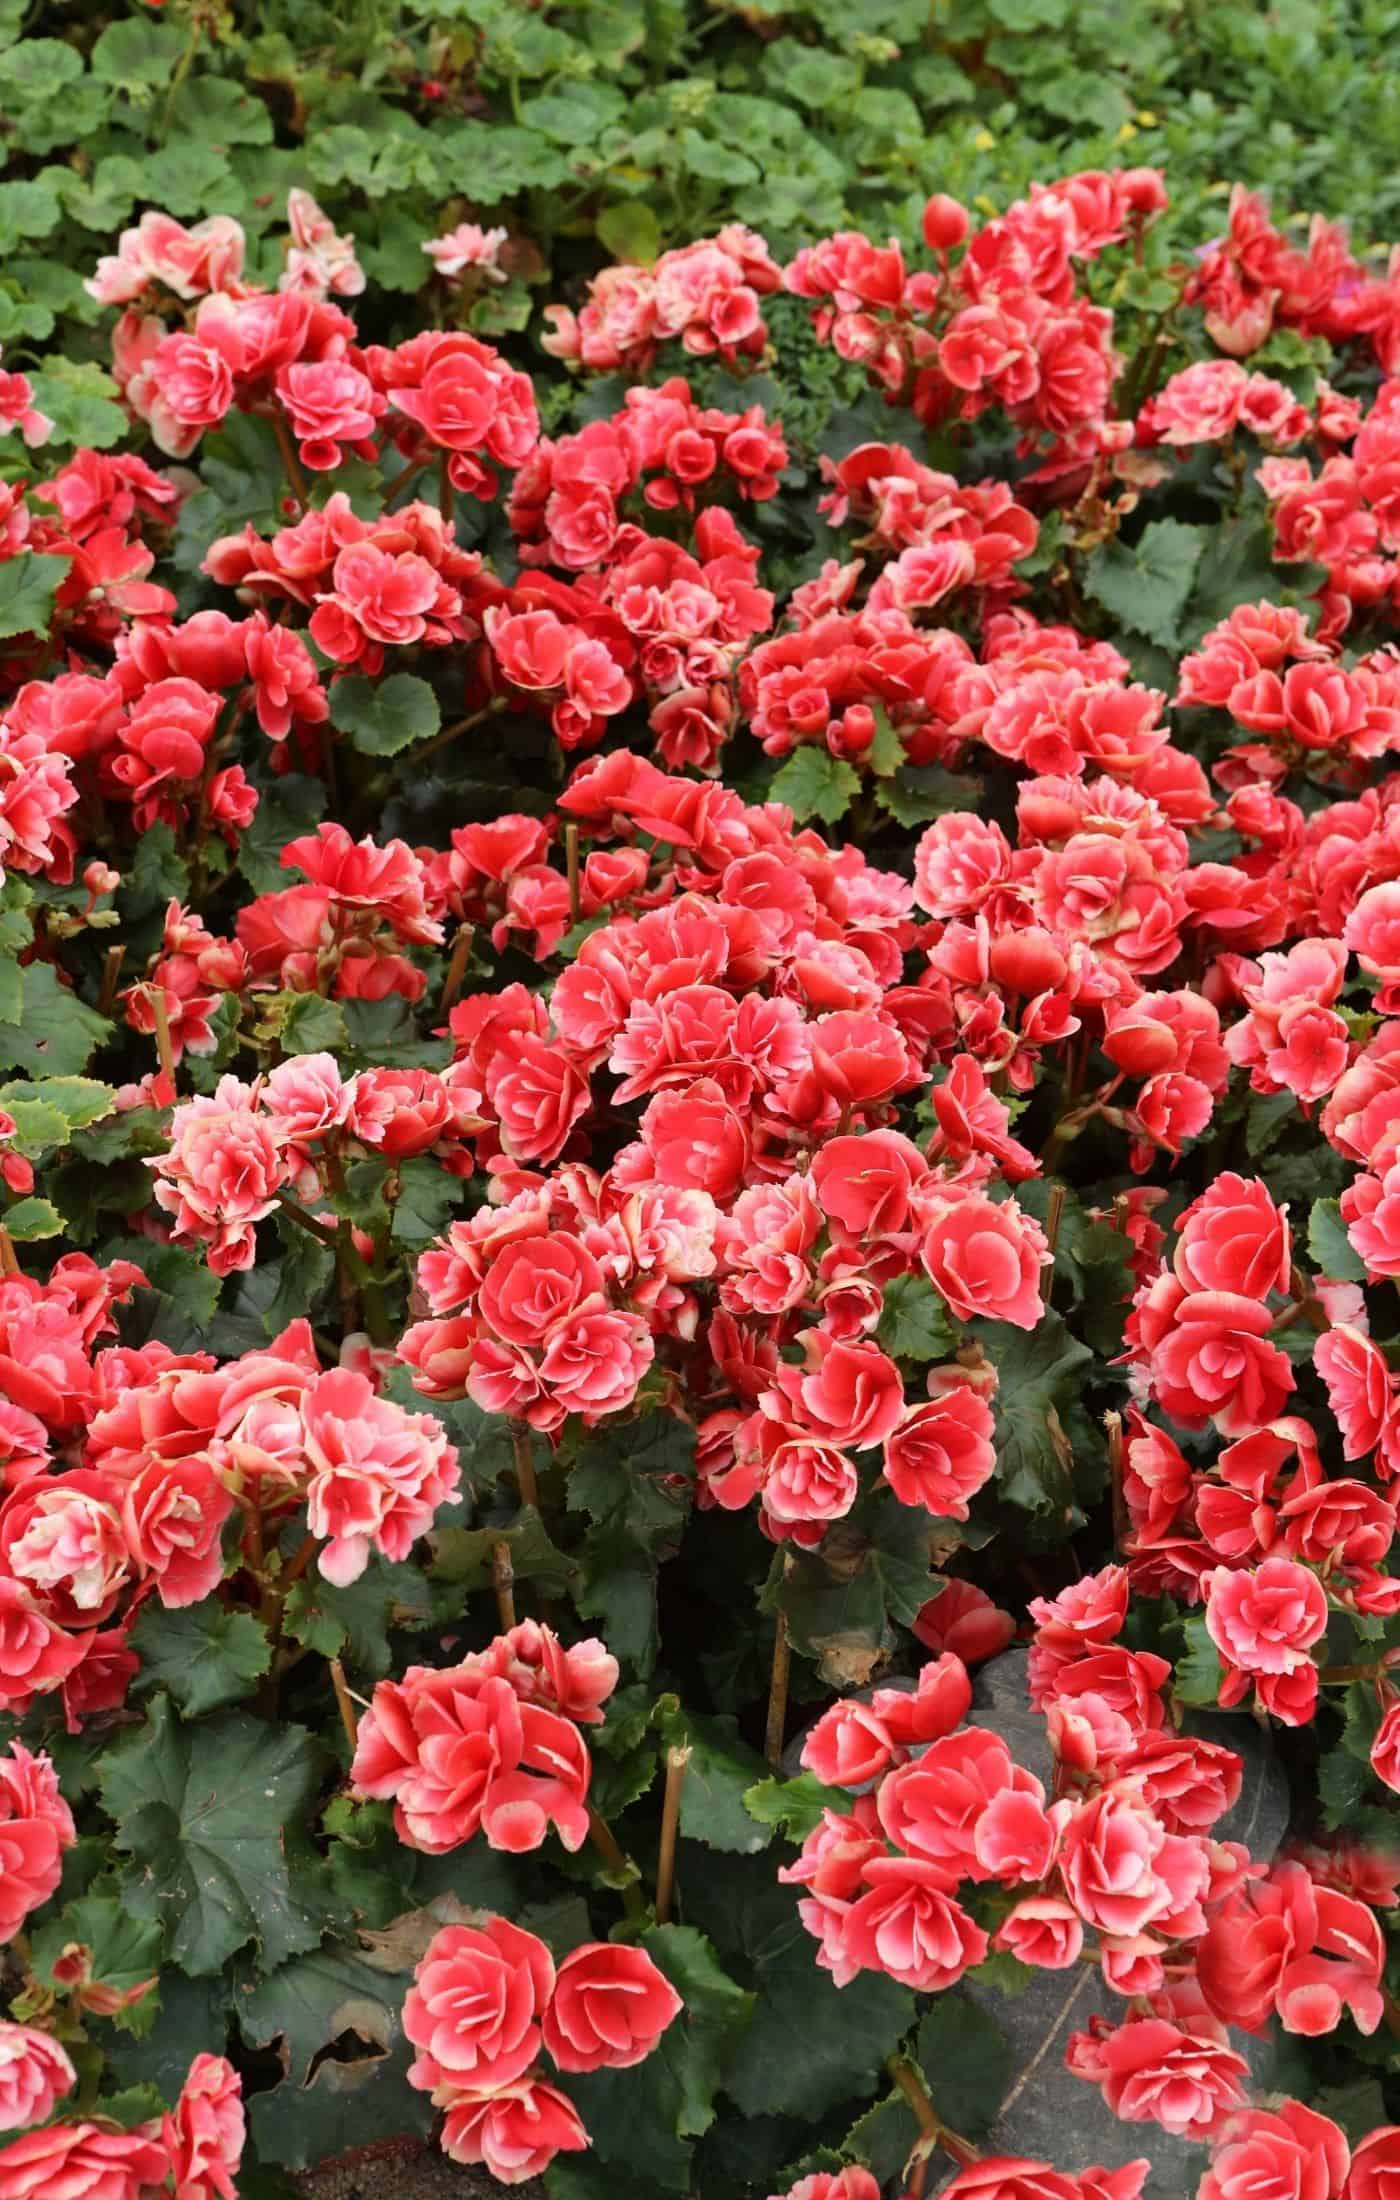 Rieger begonia plants with red flowers